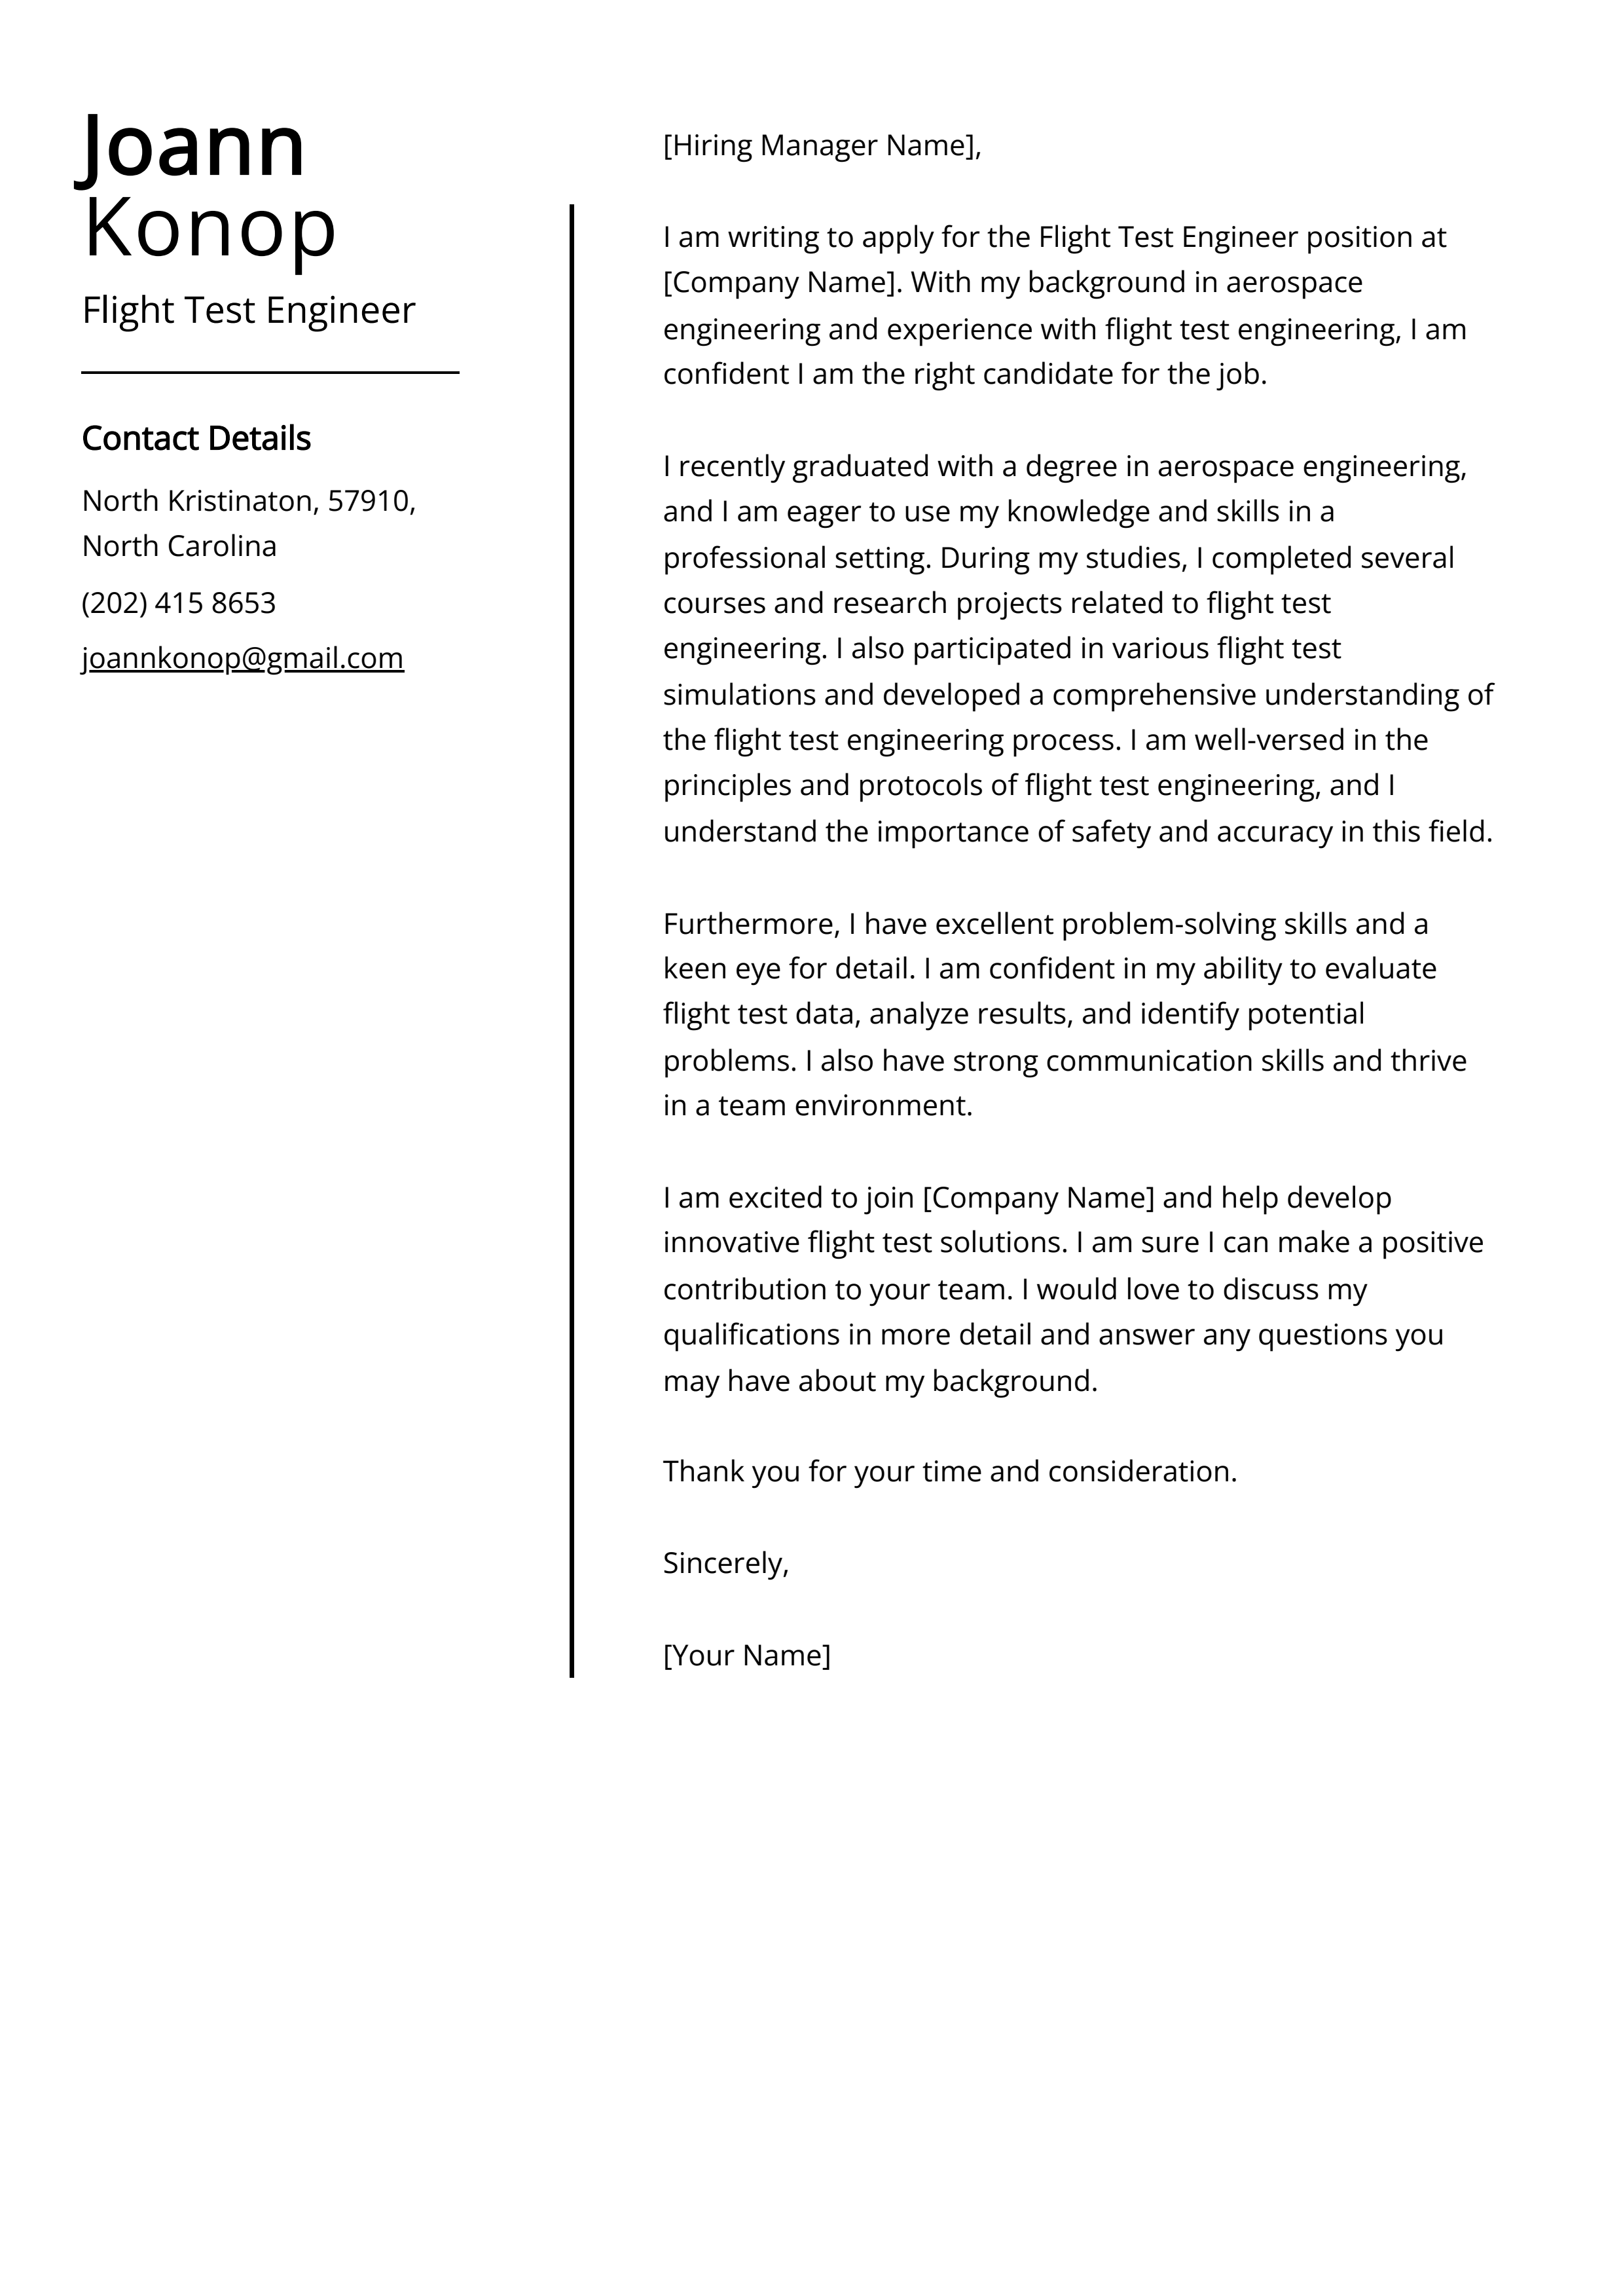 Flight Test Engineer Cover Letter Example